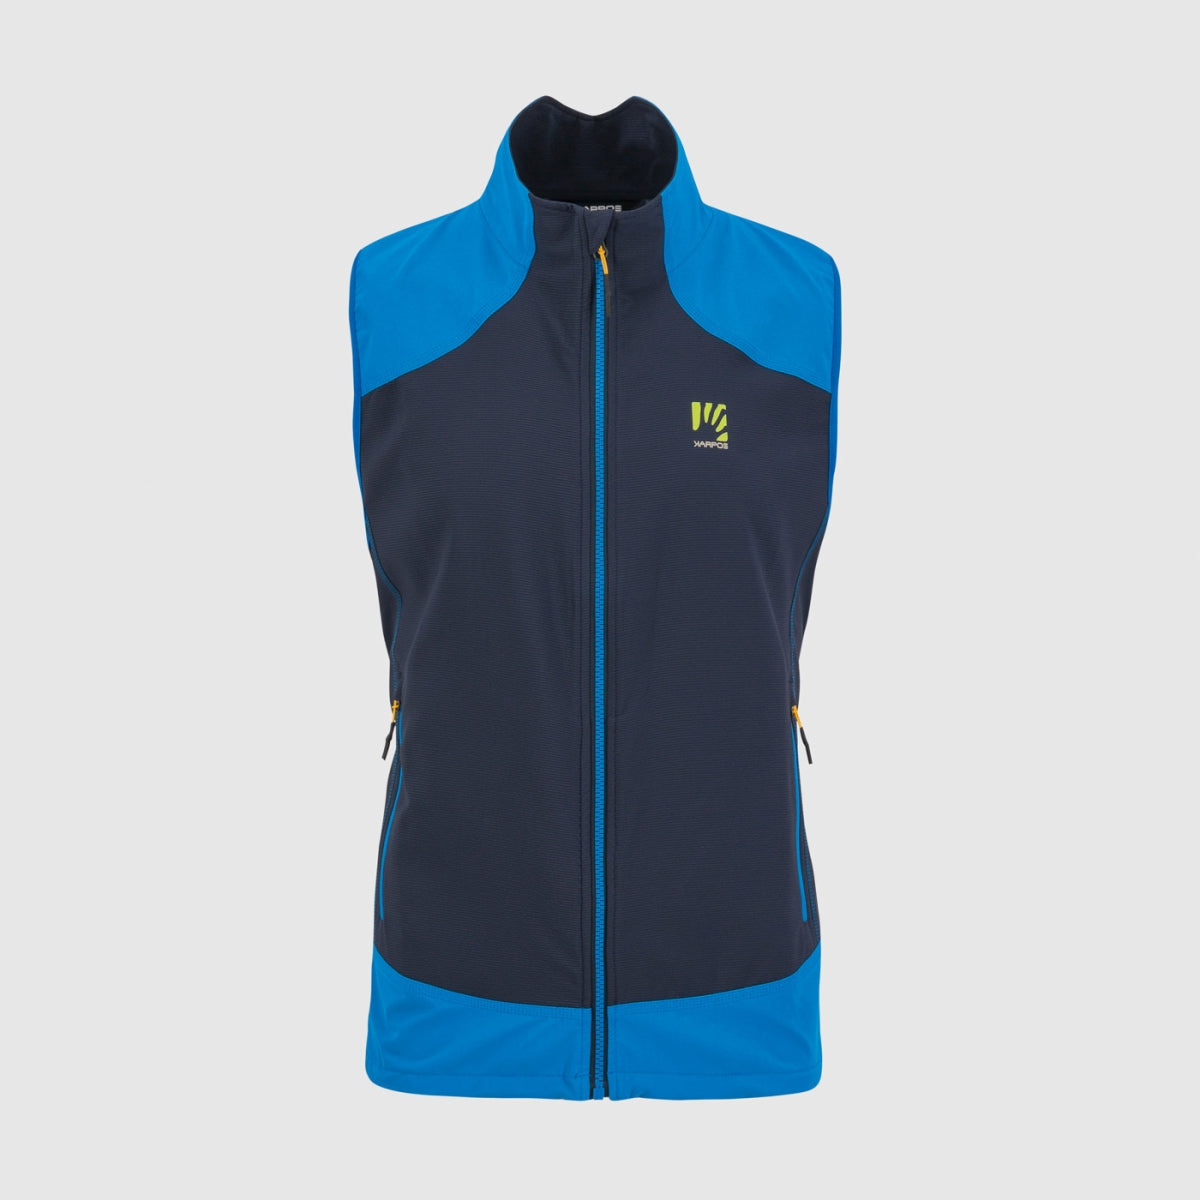 Highly breathable windproof waistcoat